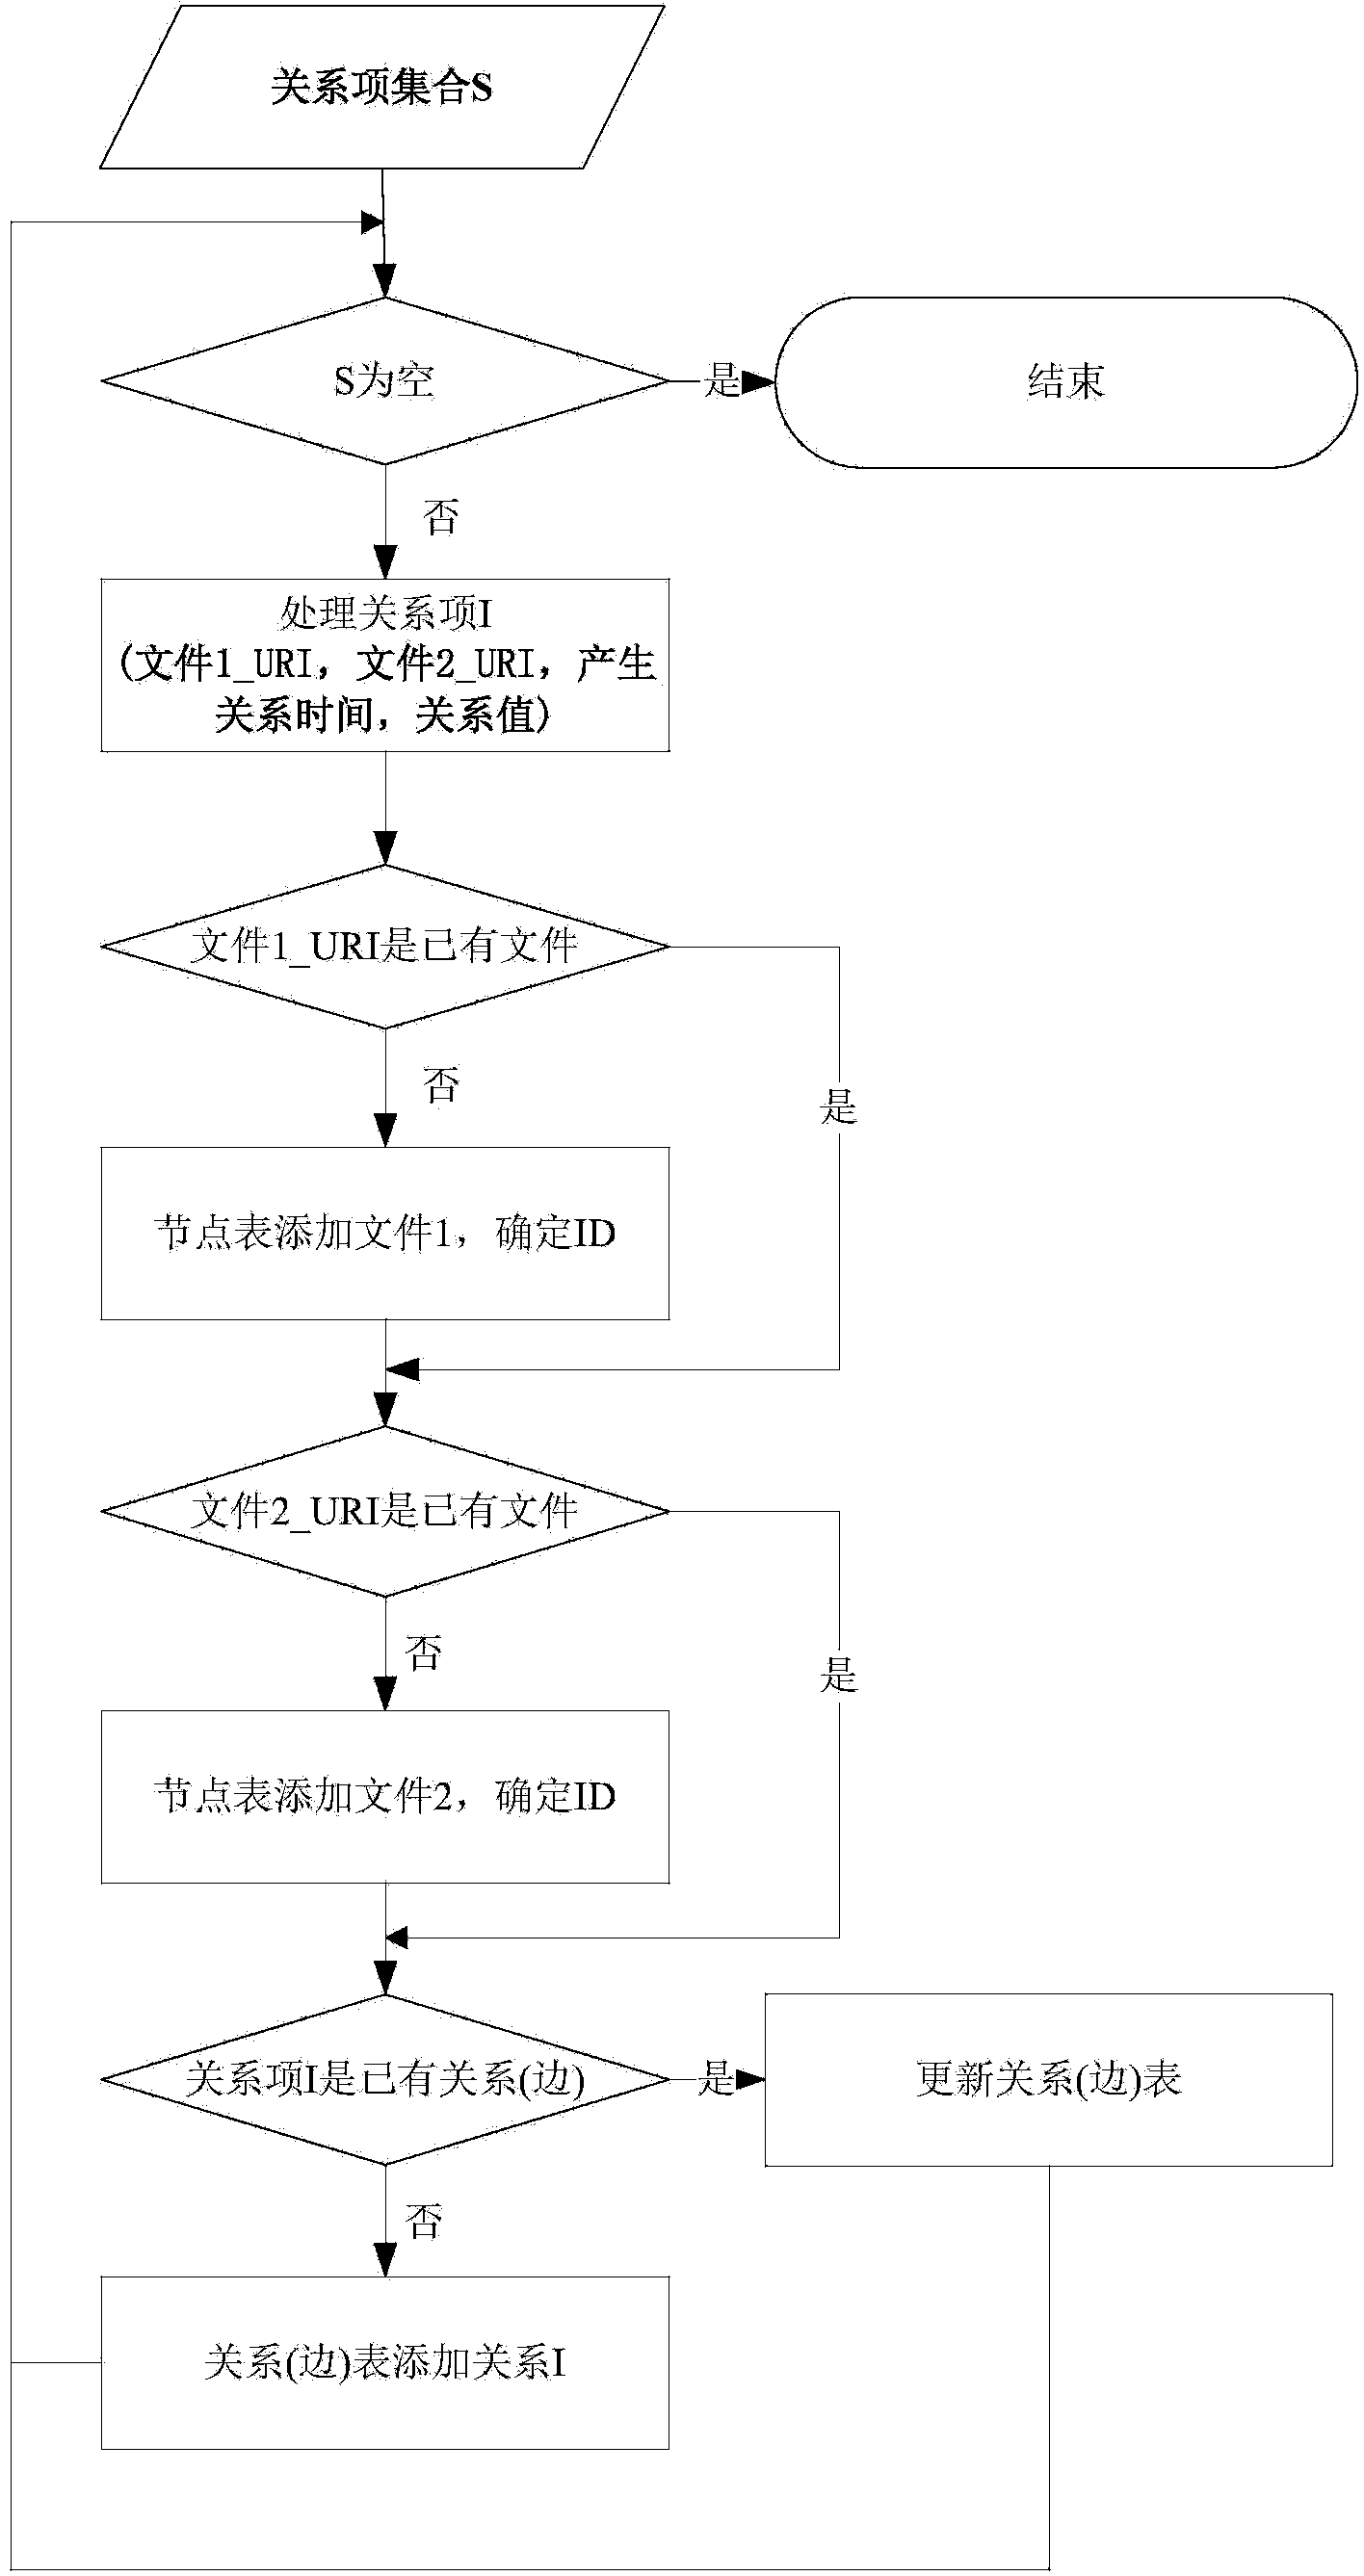 Method and system for inquiring file metadata in storage system based on provenance information